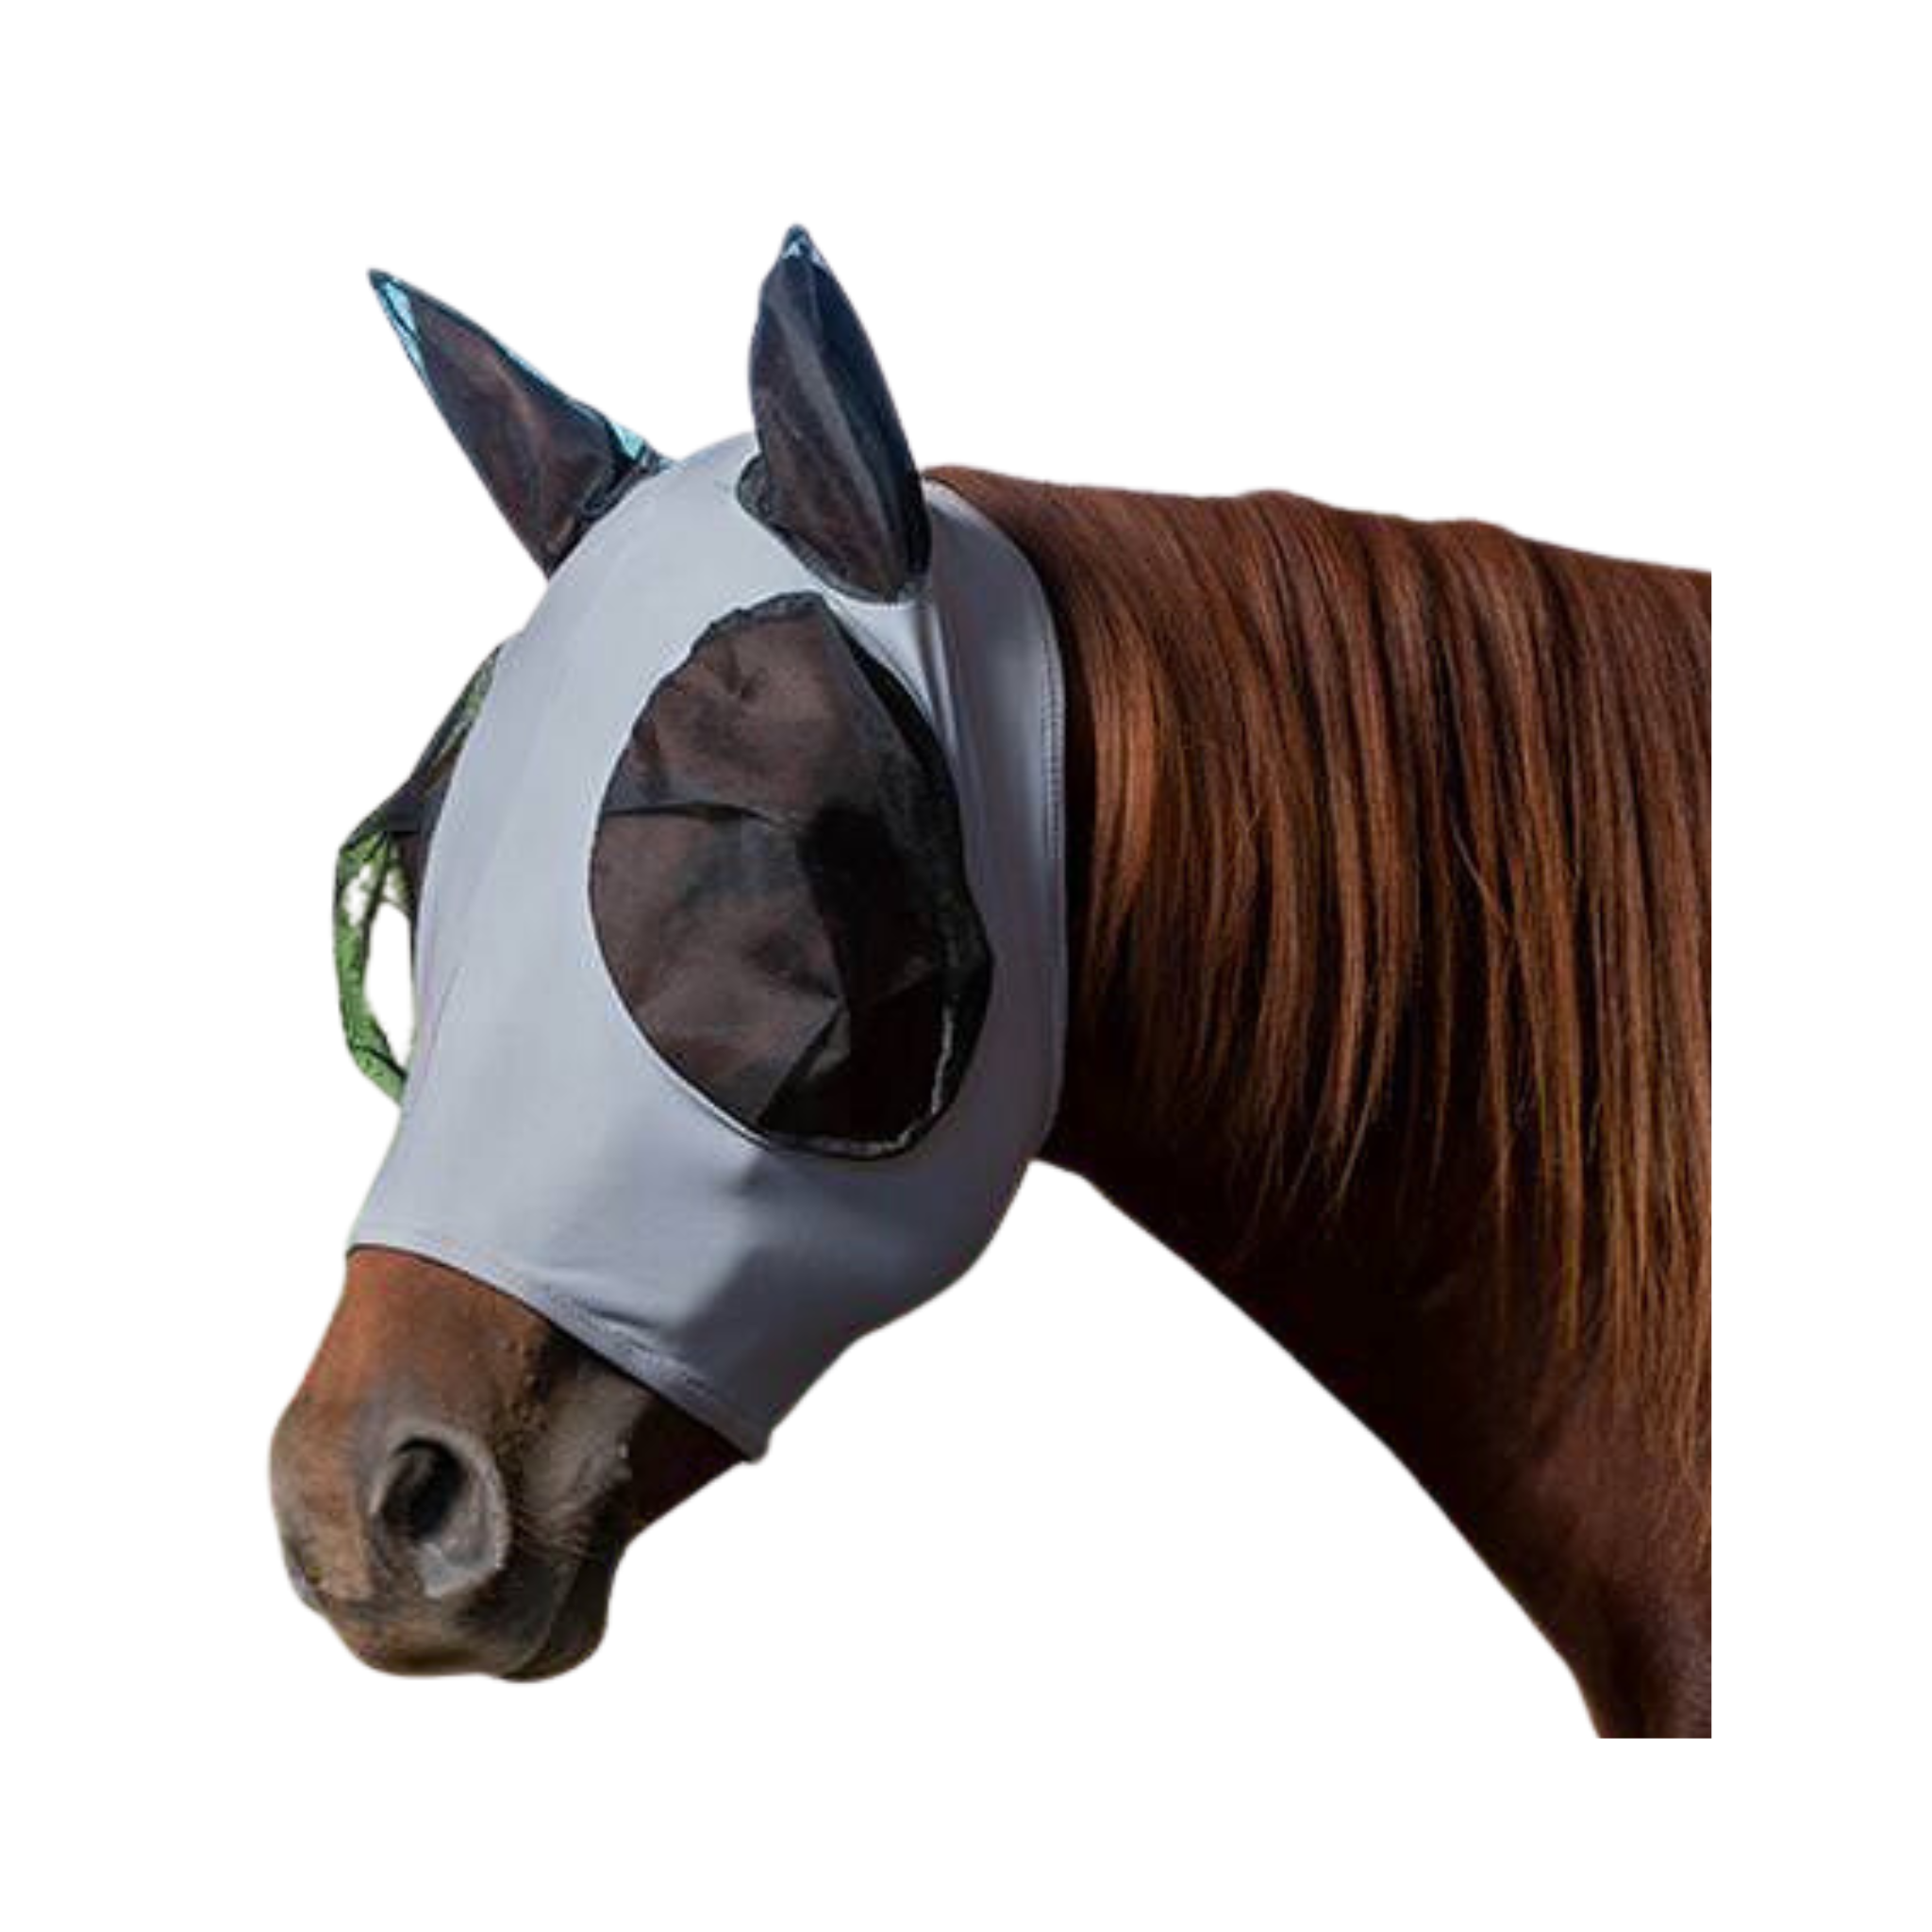 Weaver Covered Ear Lycra Fly Mask - Assorted Colors